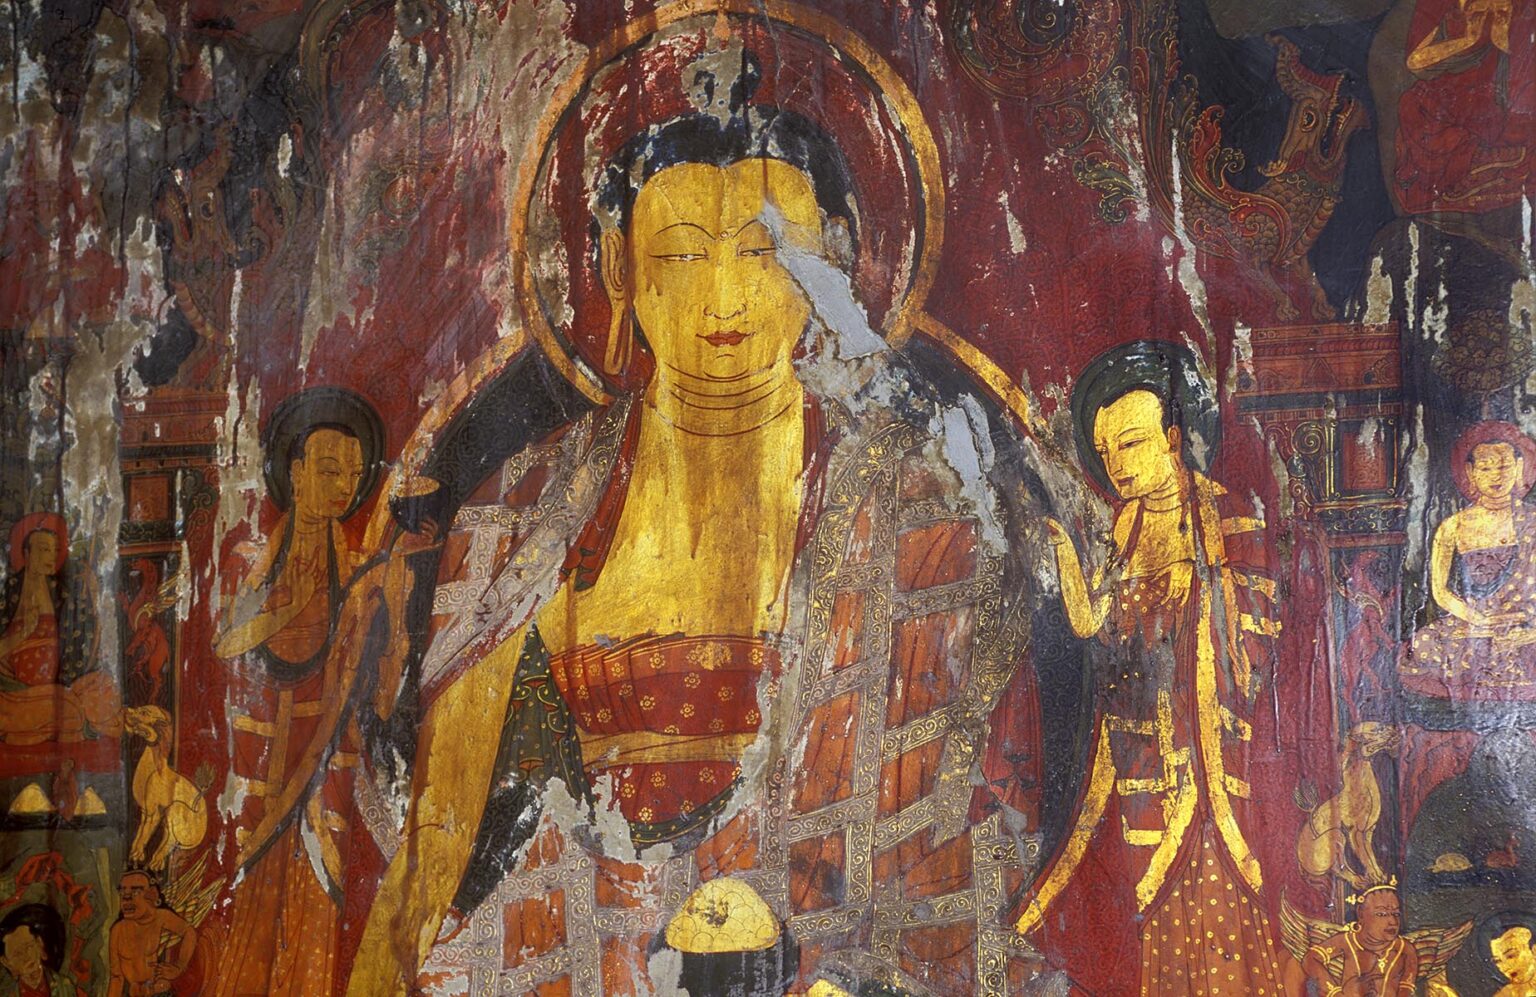 BUDDHA PAINTING inside the CHAPEL OF THE PREFECT (16th C.) at TSAPARANG, the lost city of the GUGE KINGDOM - TIBET